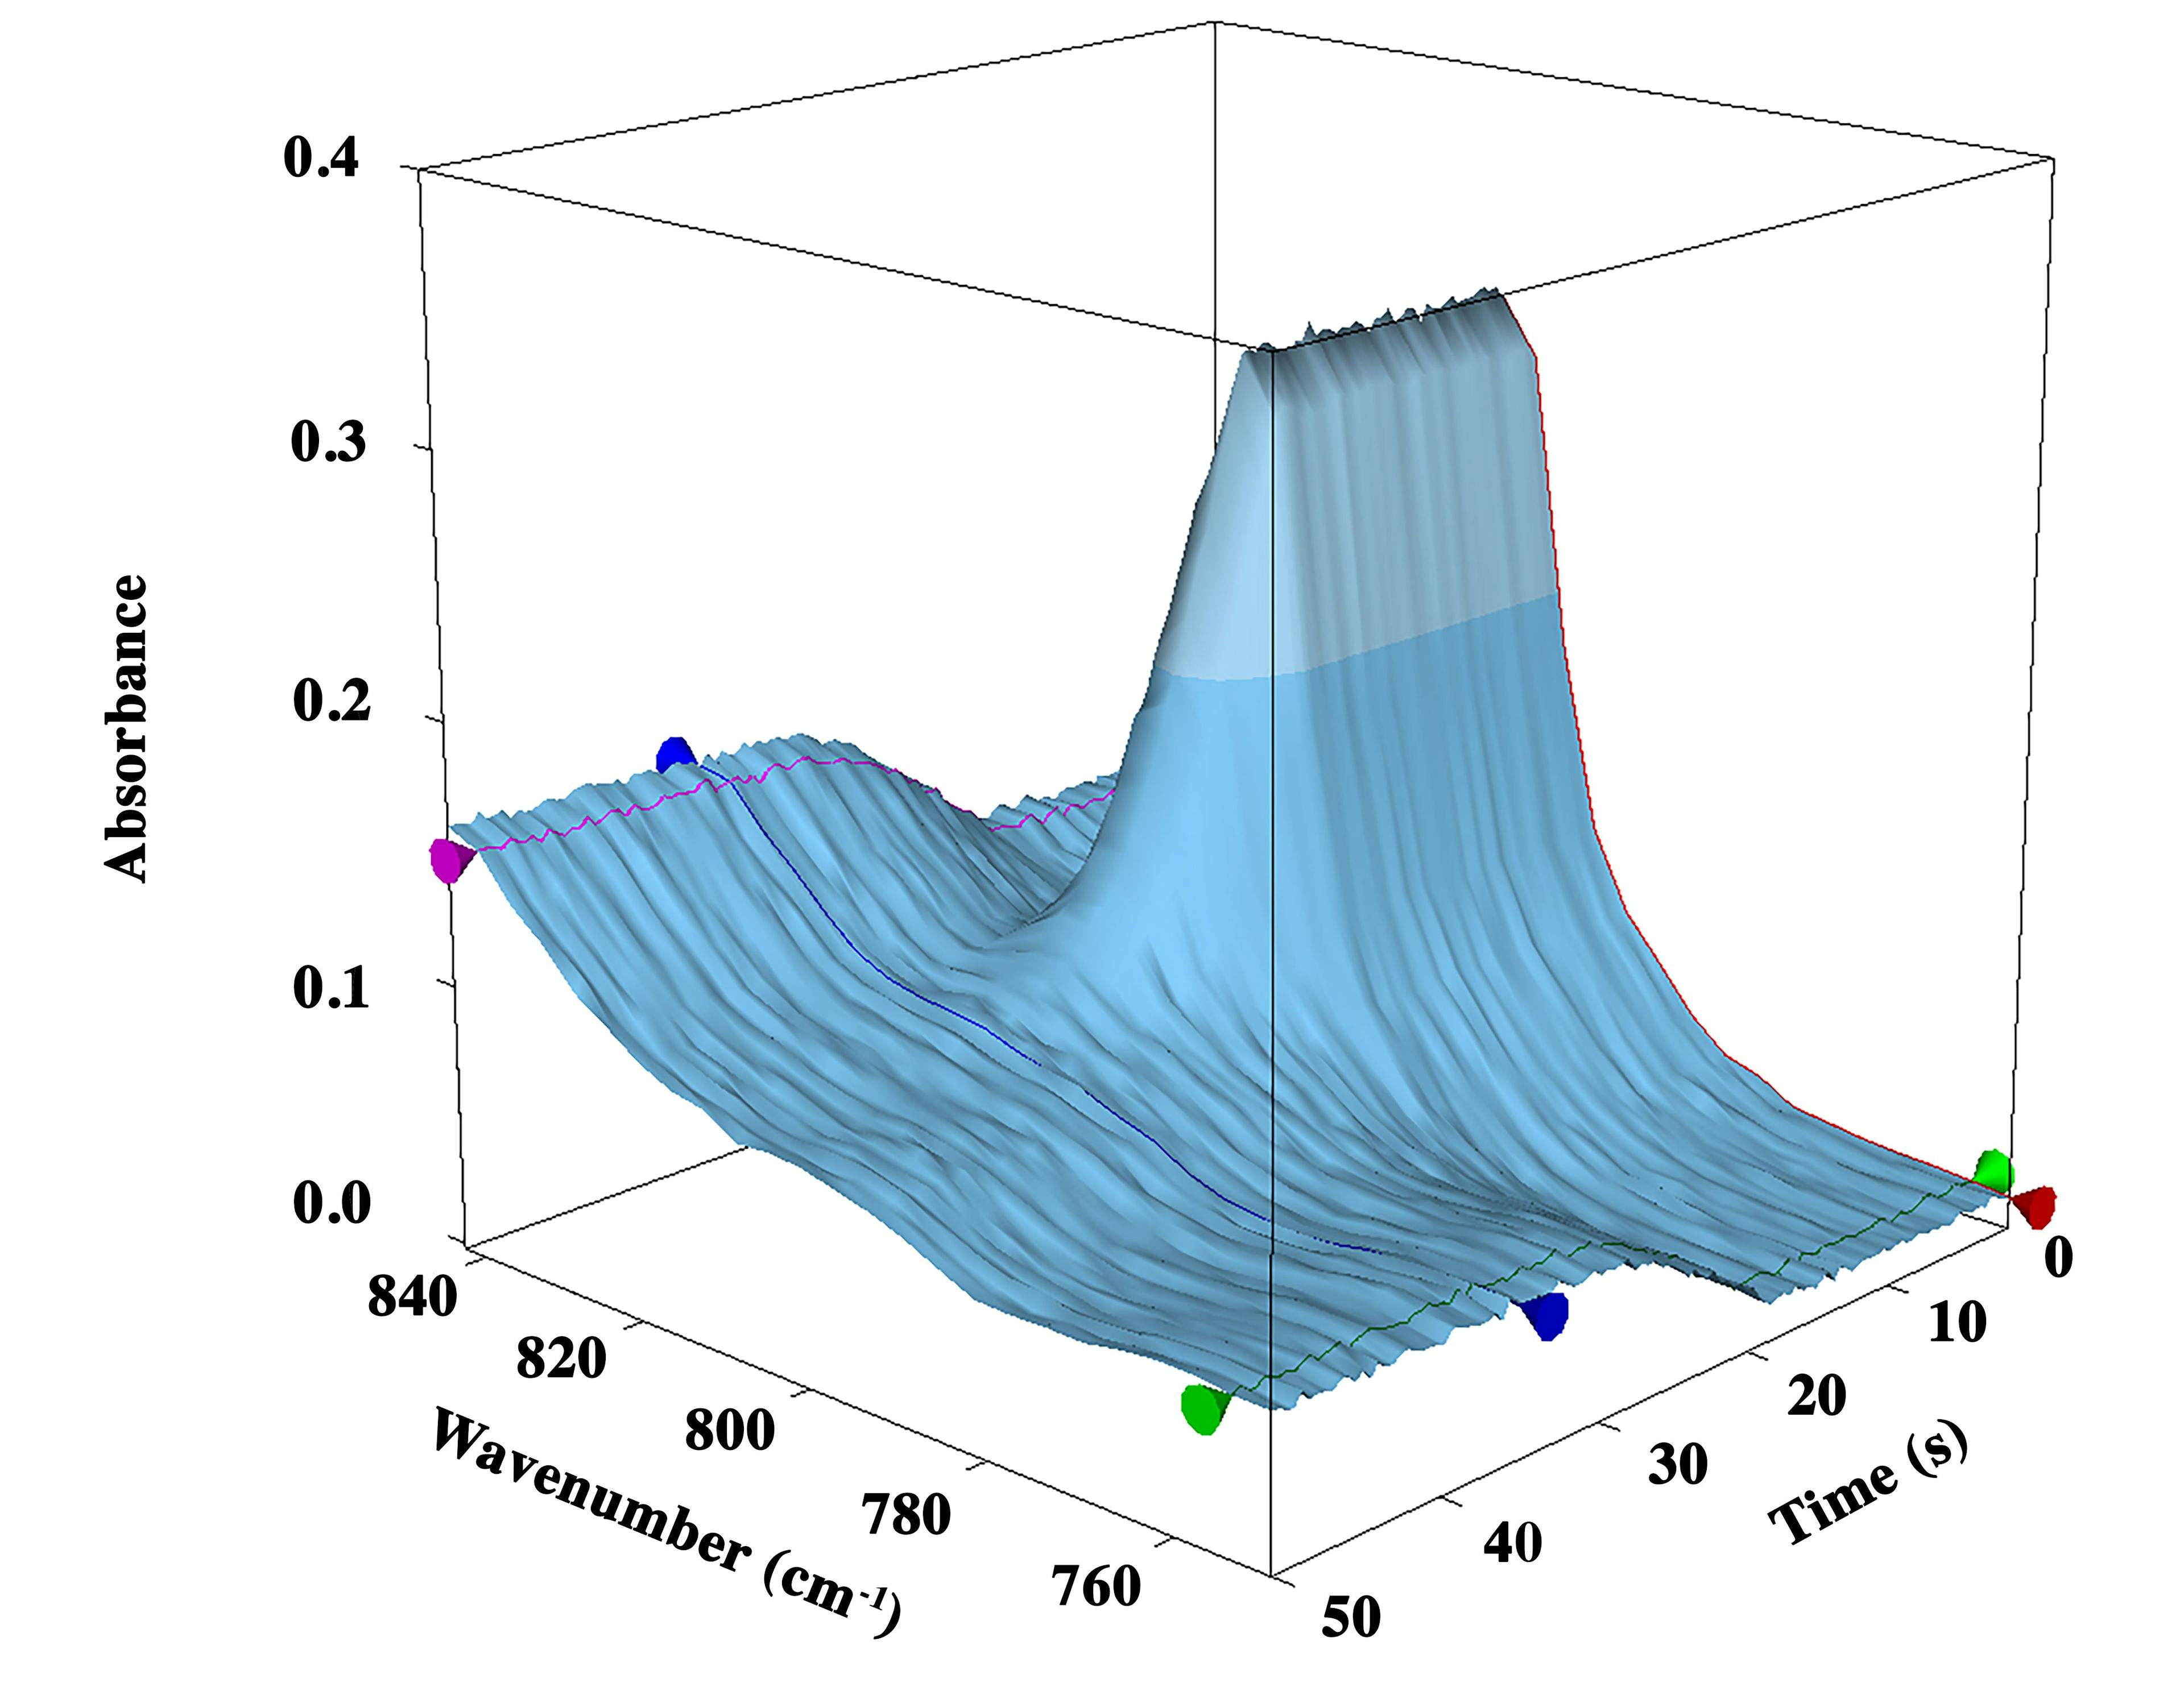 Figure 2: Acrylate photopolymerization using 405 nm light. Waterfall plot showing the band change over time. Irradiation began at 19 s.